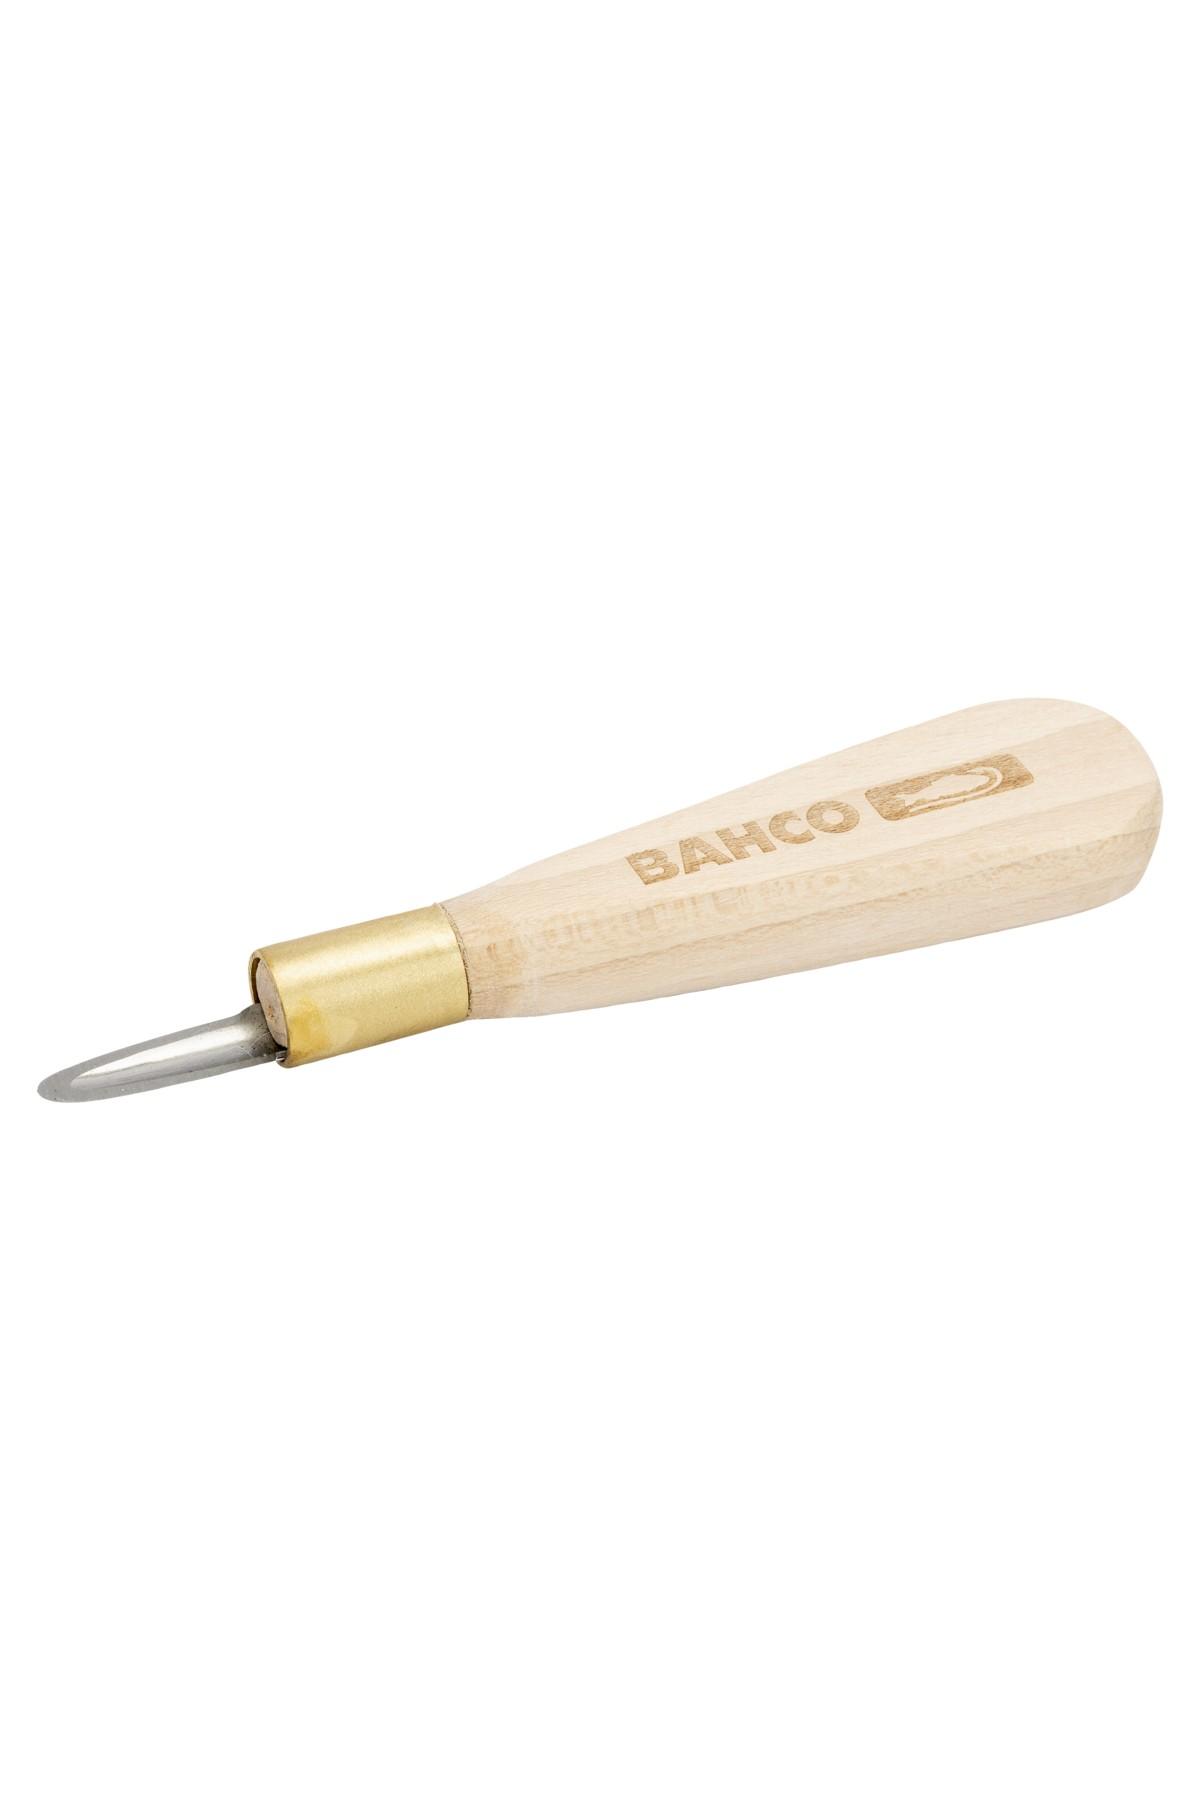 Electrician's knife with wooden handle for membrane cans